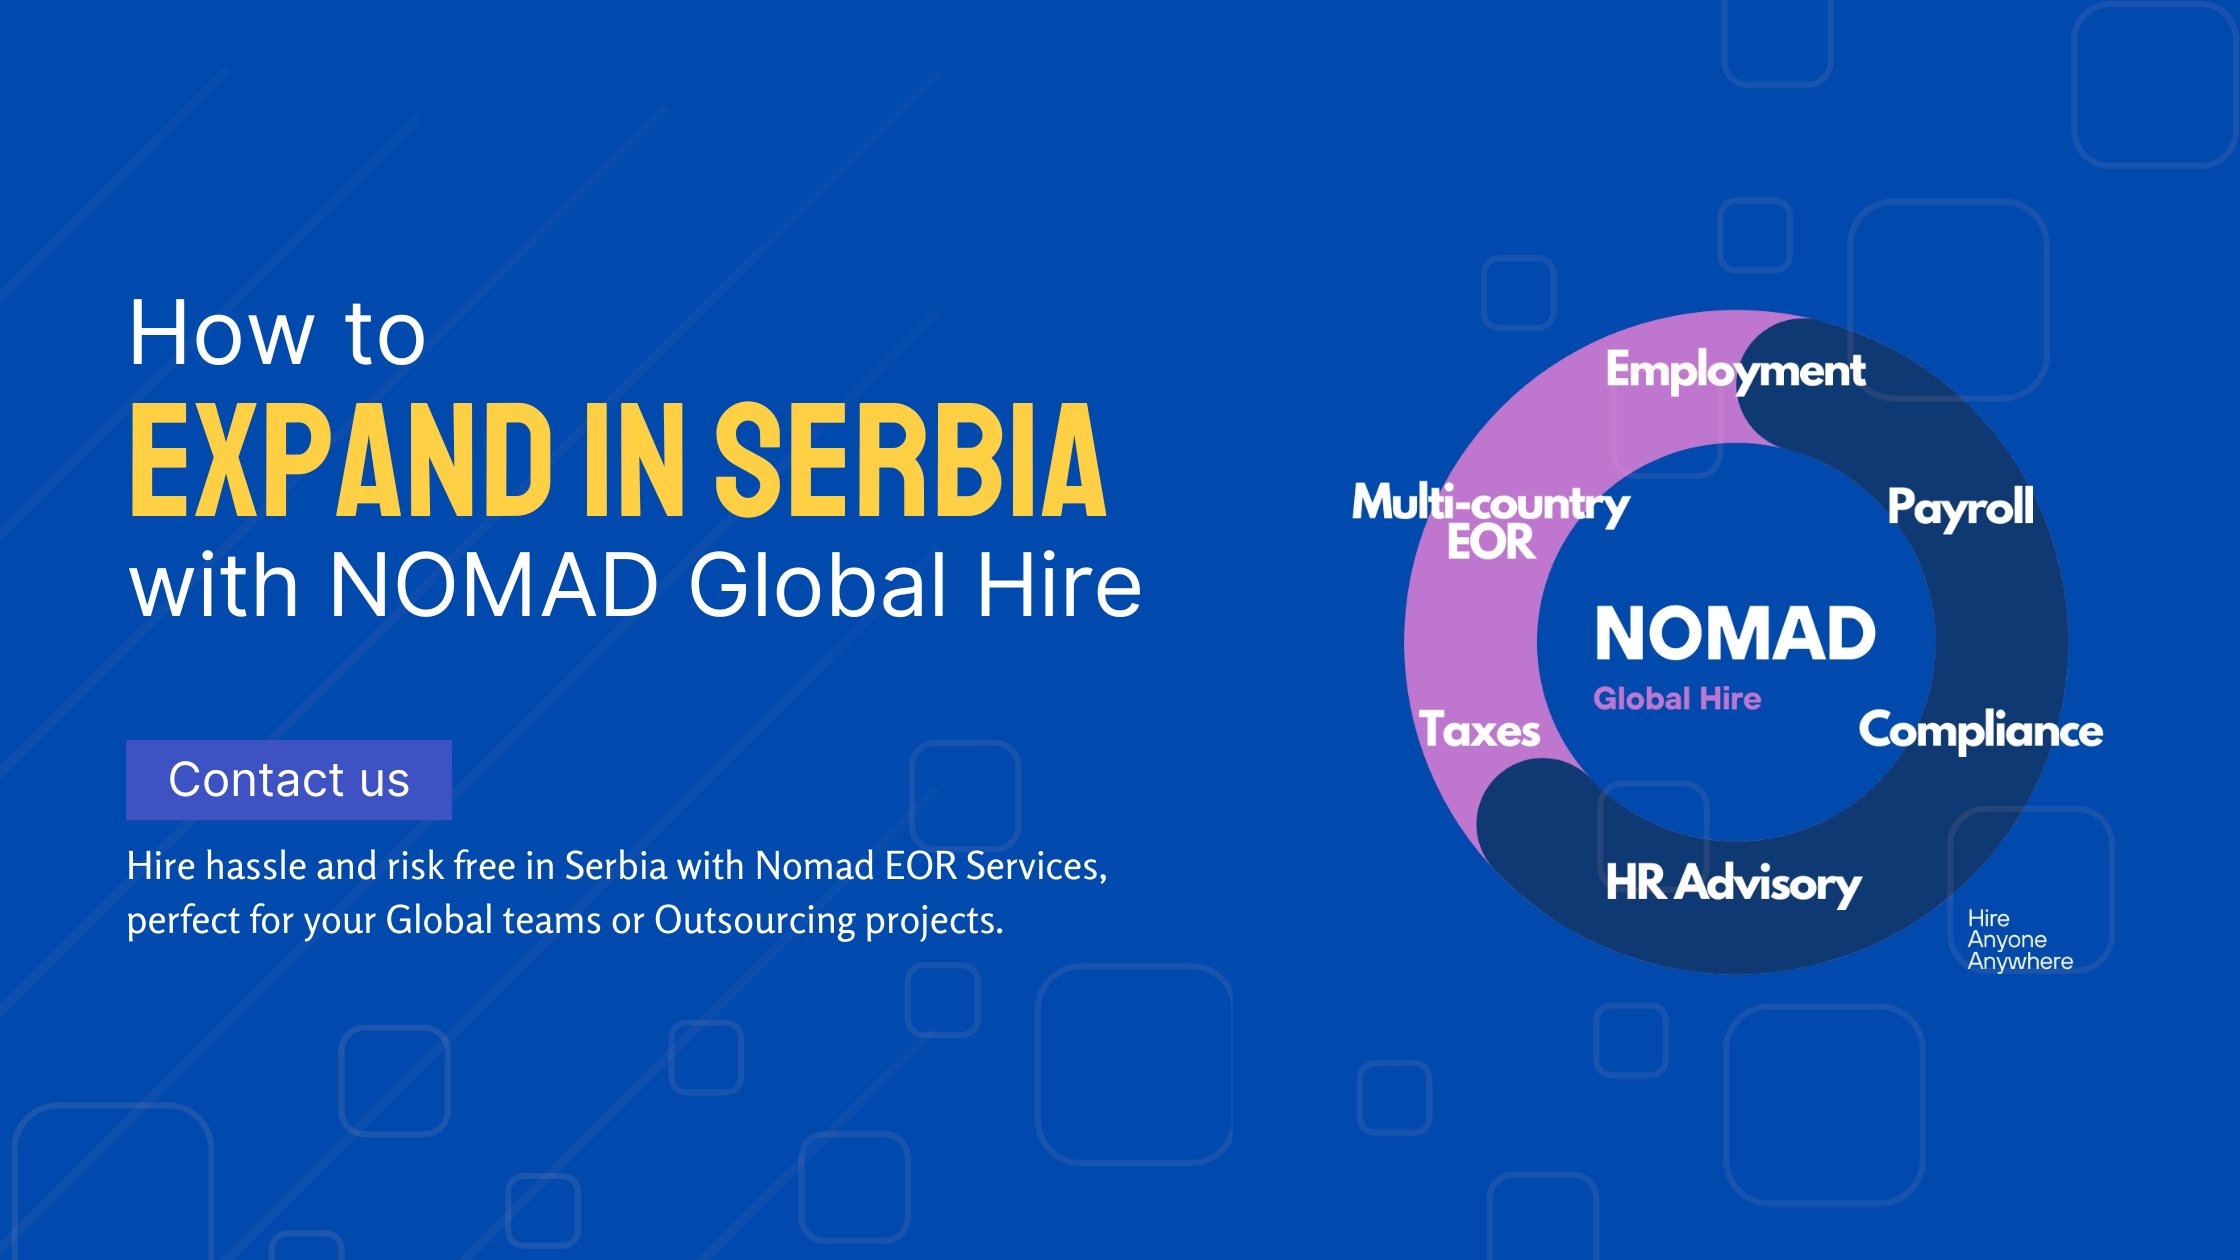 Nomad Global Hire Serbia